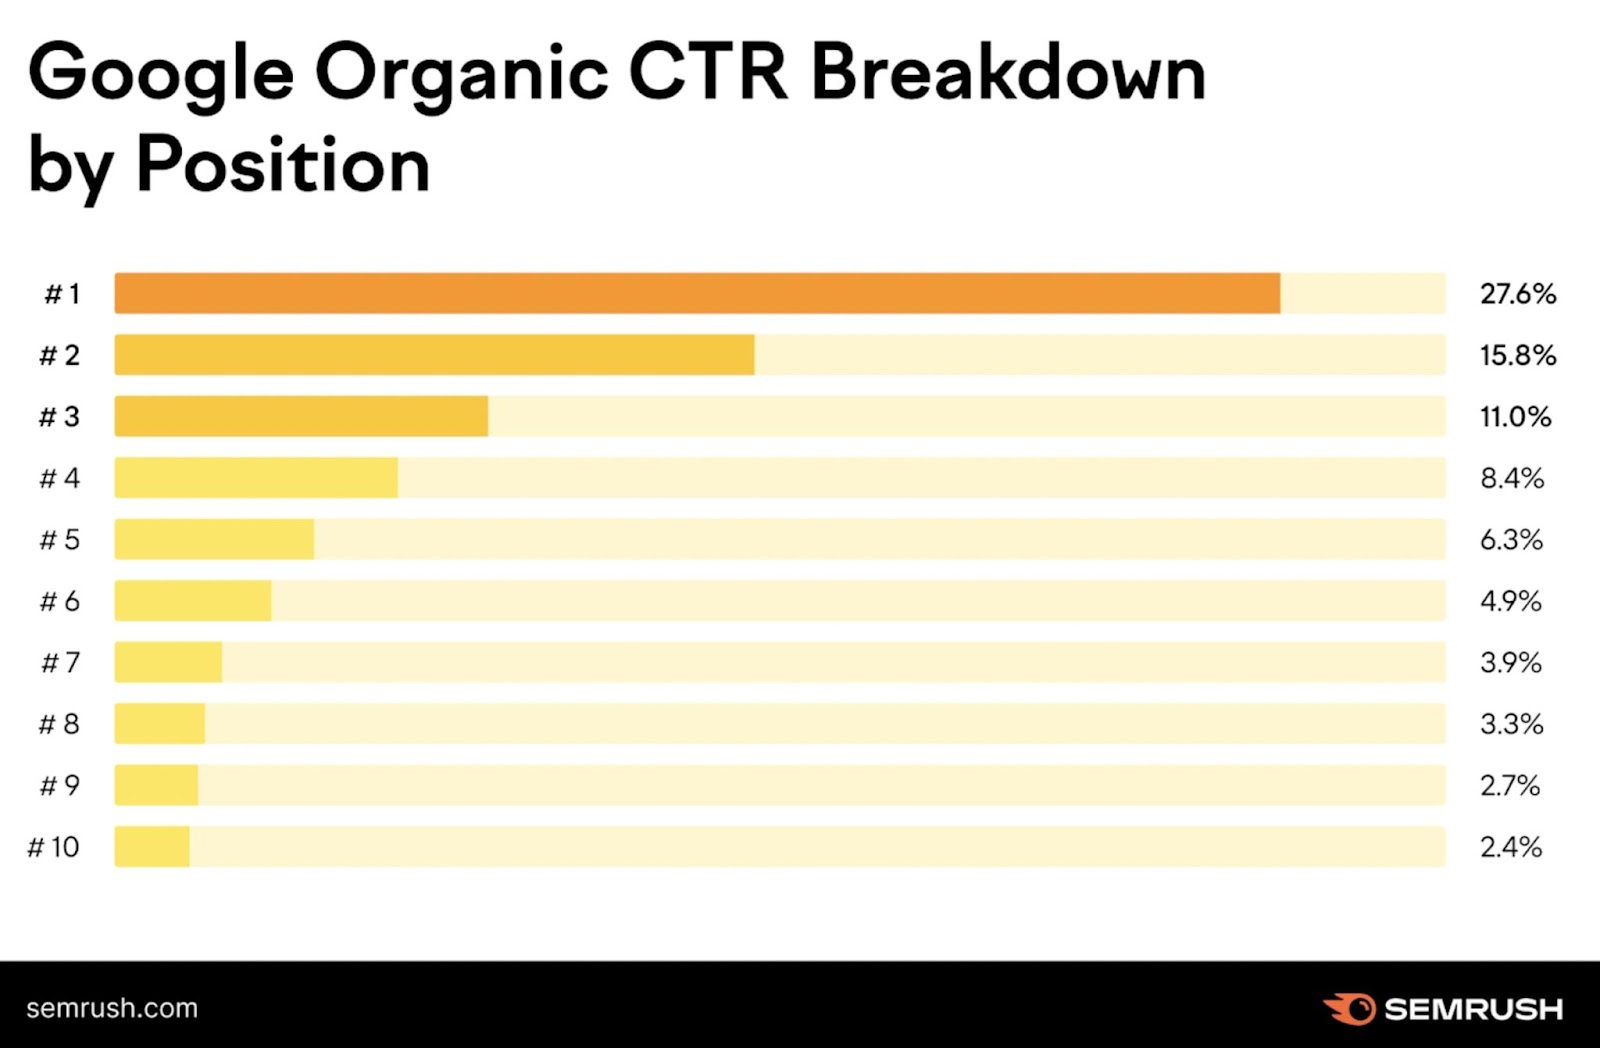 A chart showing Google organic CTR breakdown by position